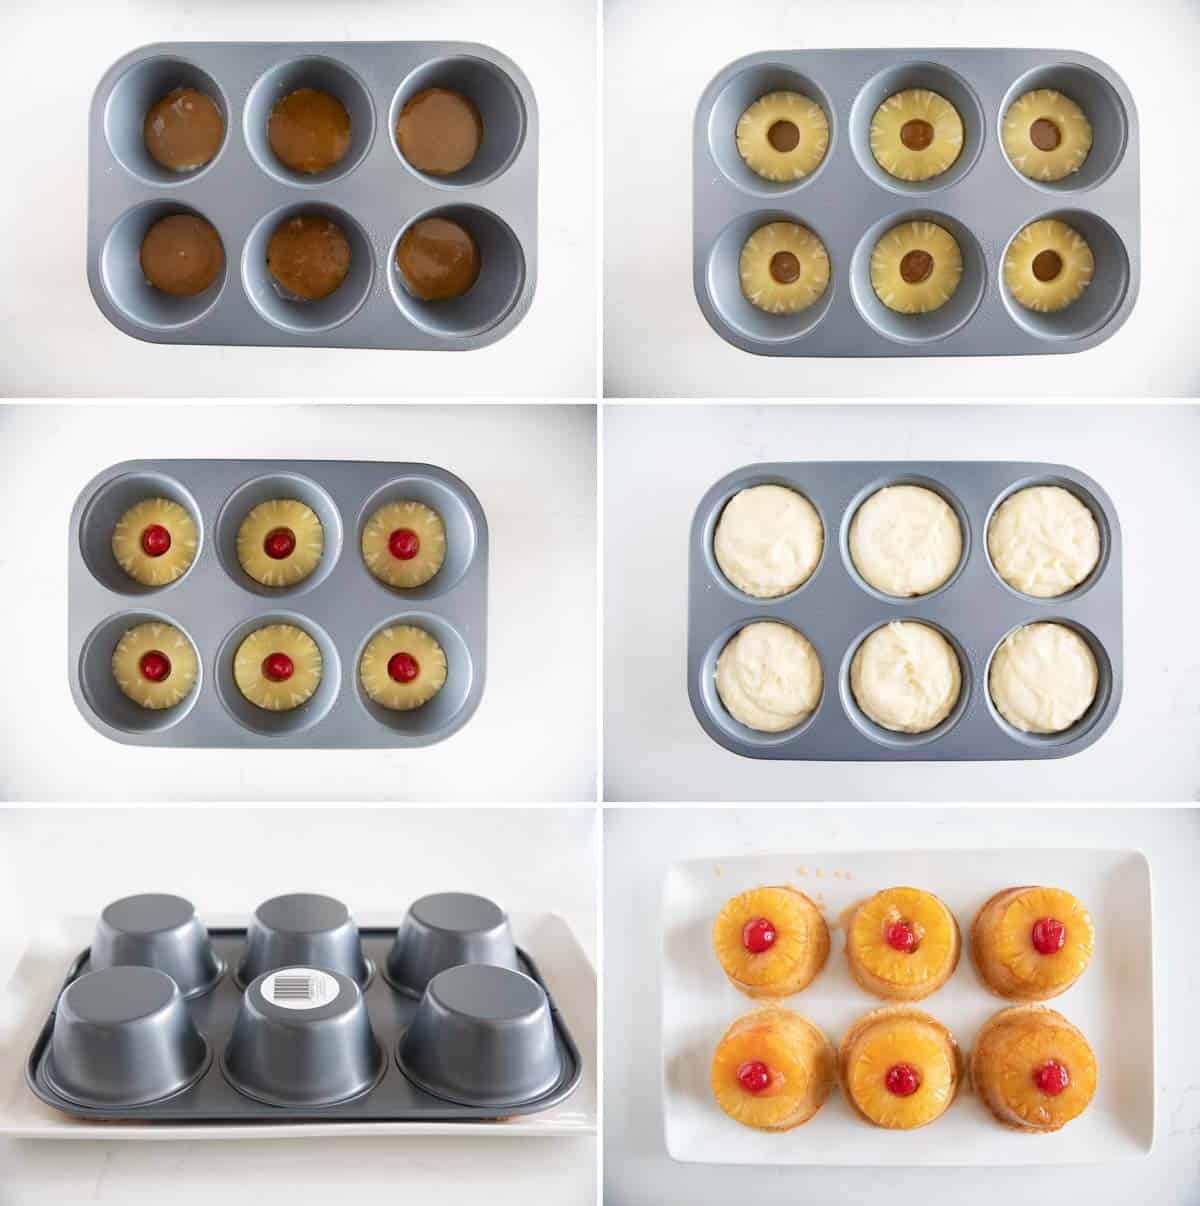 Steps to assemble pineapple upside down cupcakes.